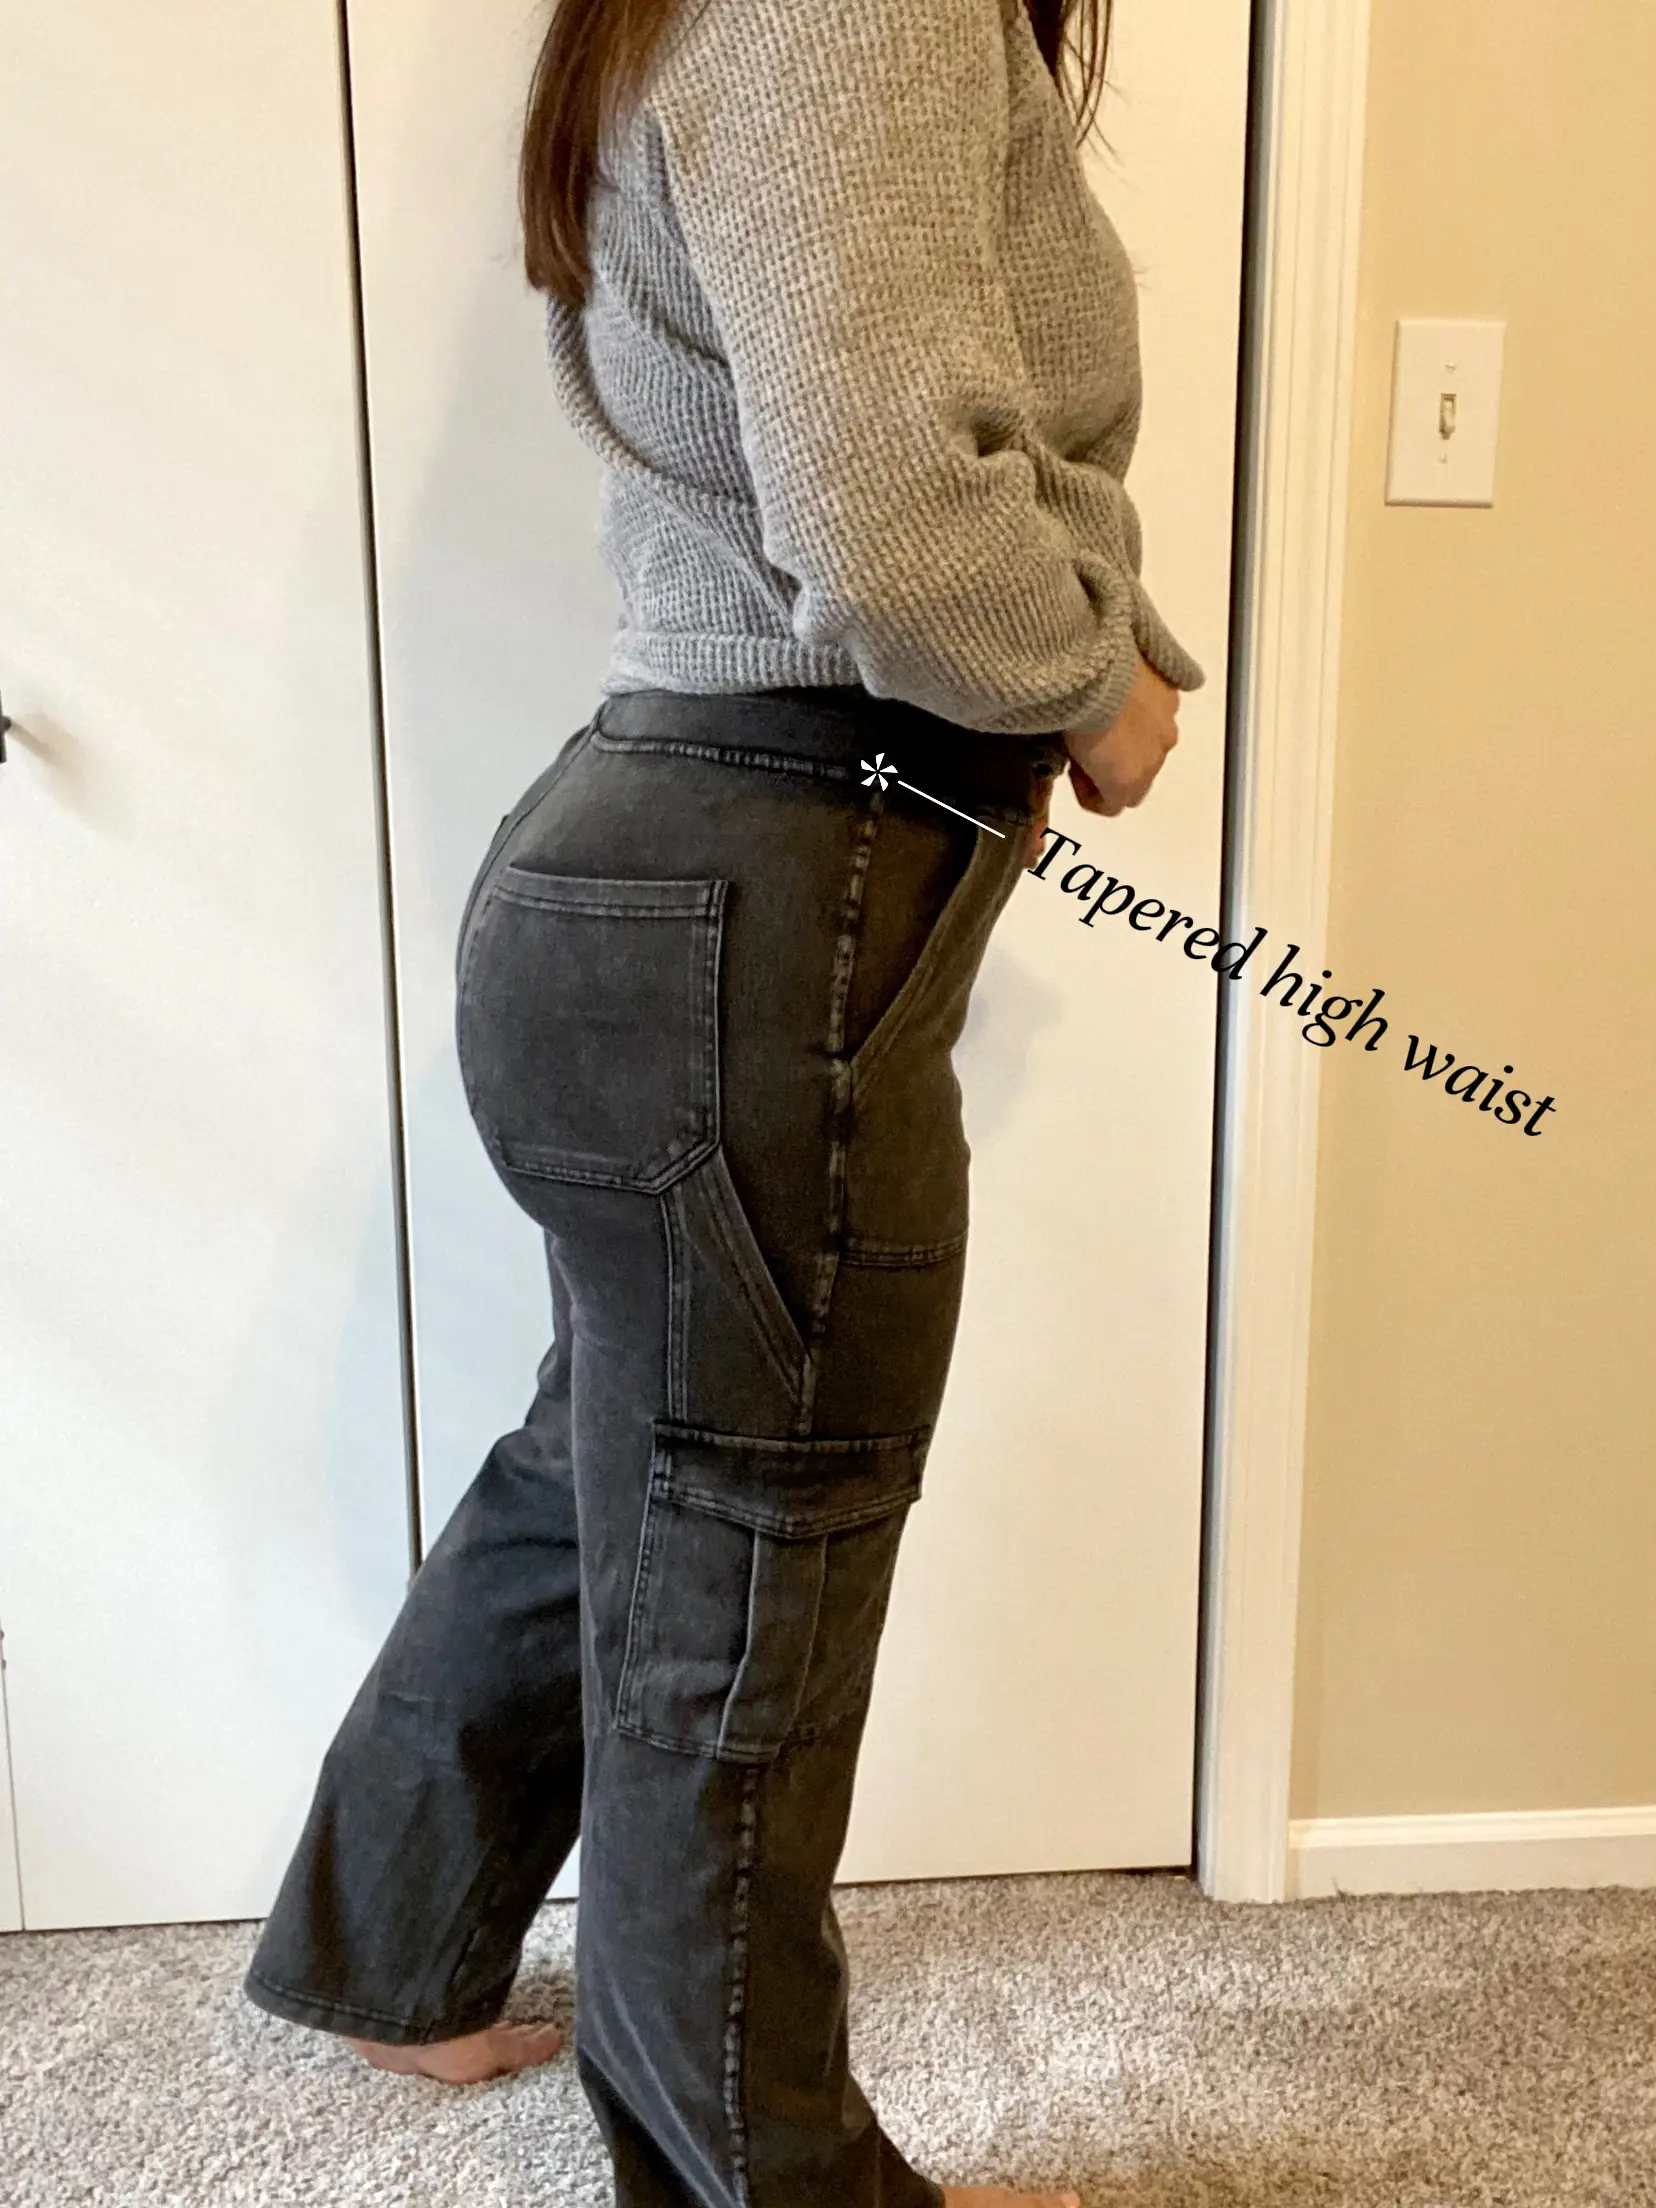 The viral halara magic jeans are so comfortable and stretchy! 💞✨ The , Jeans